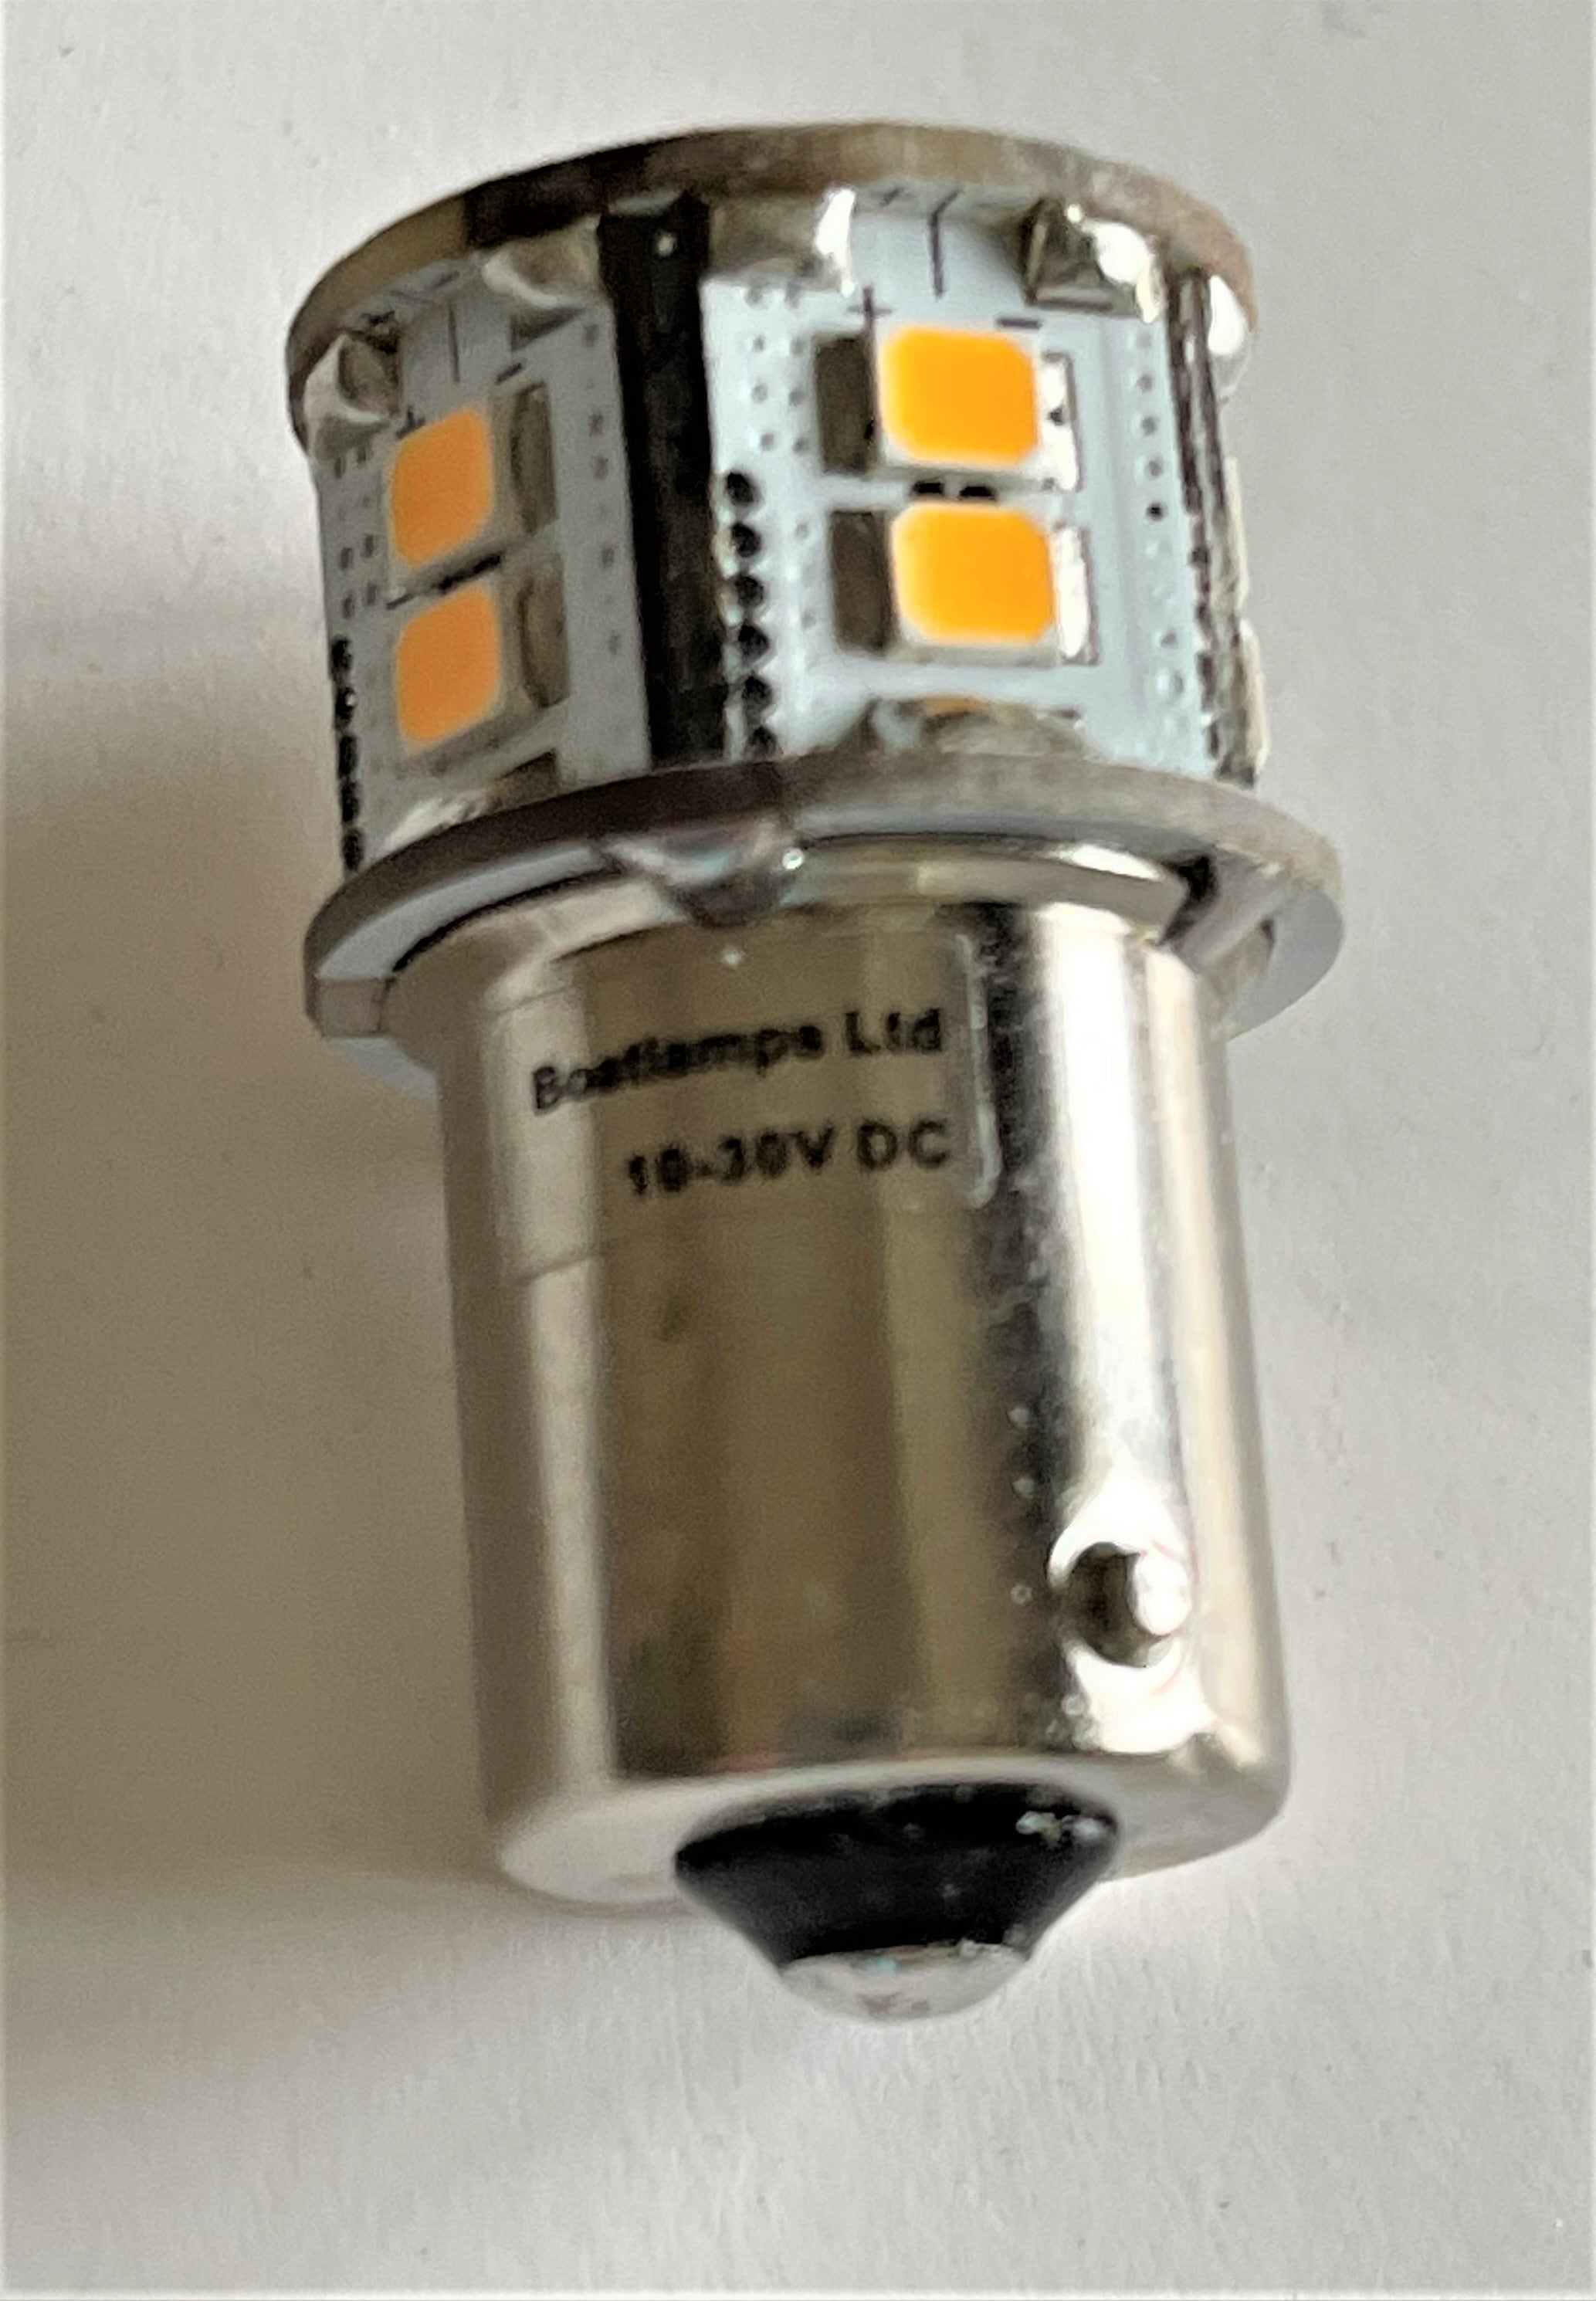 BA15D 14 SMD 2835 High Output Compact LED Lamp • Boatlamps